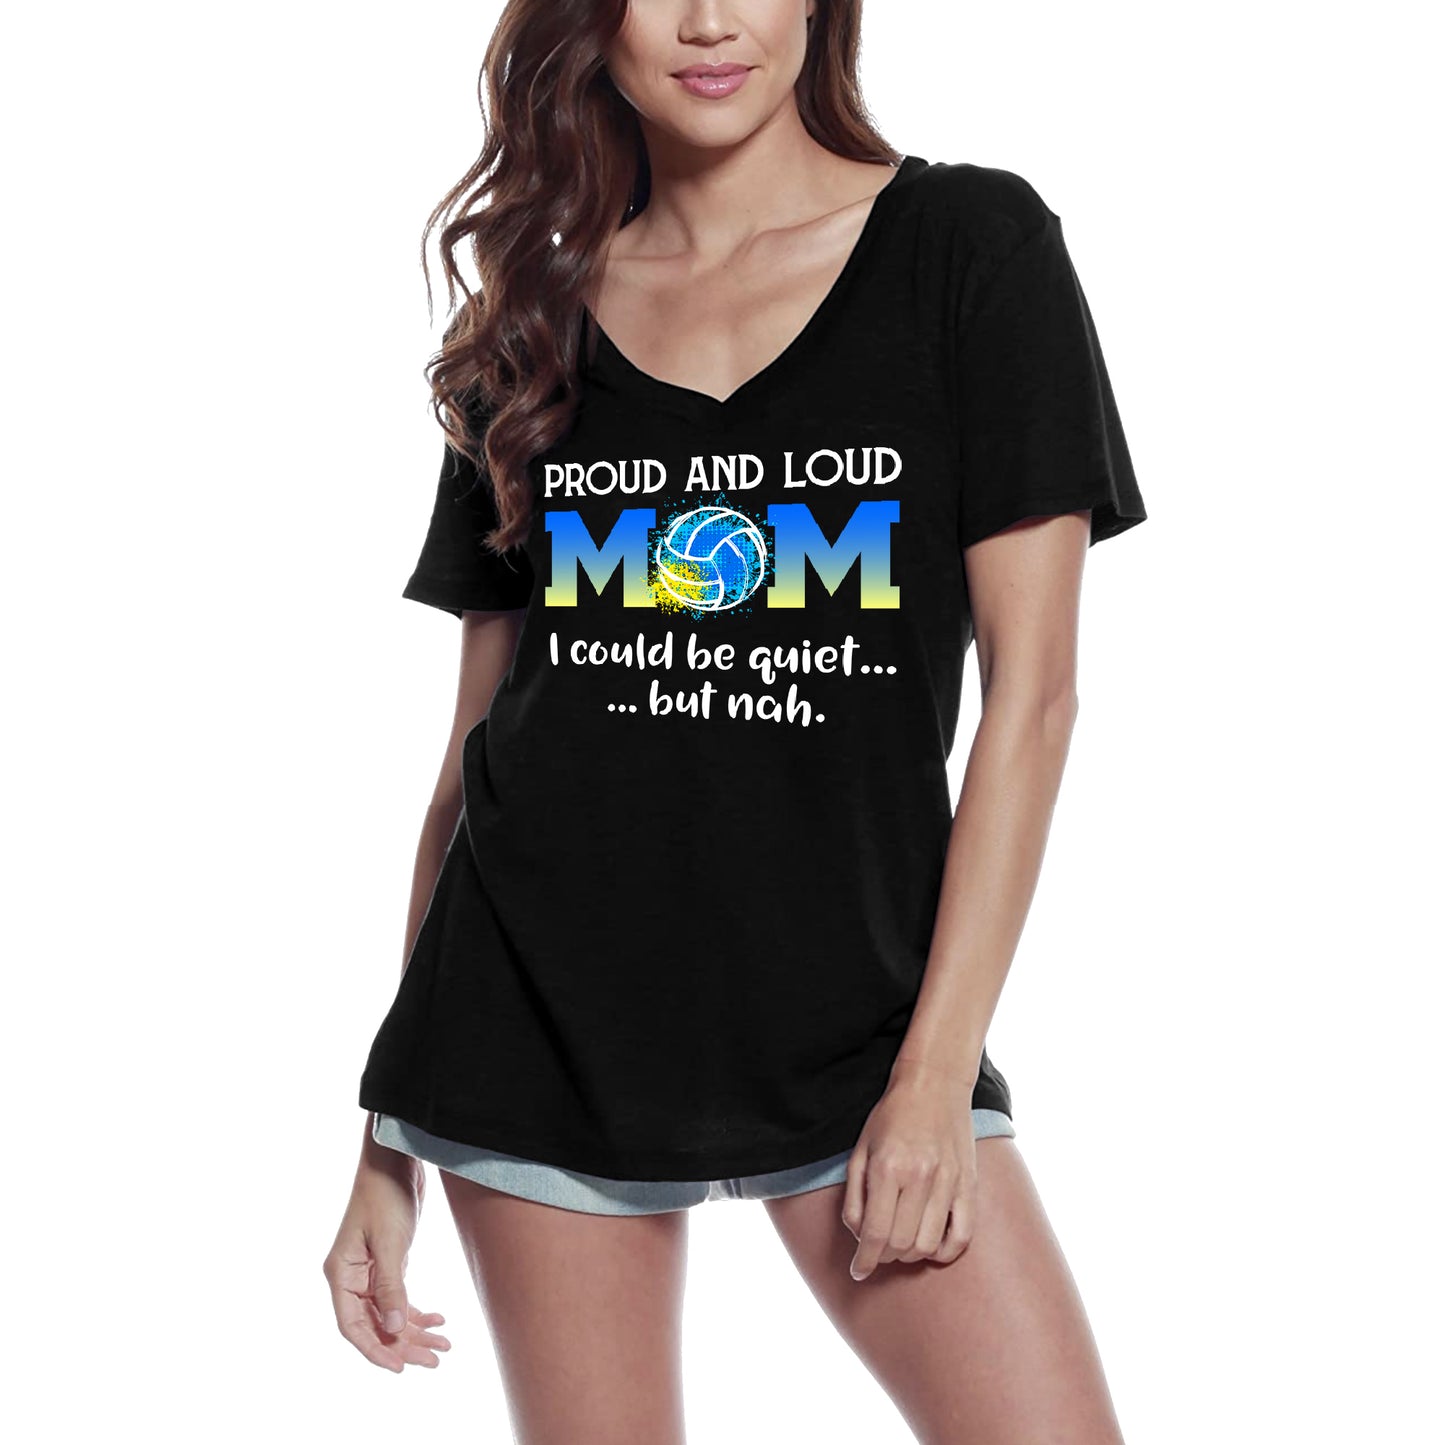 ULTRABASIC Women's V-Neck T-Shirt Proud and Loud Mom - Funny Quote Volleyball